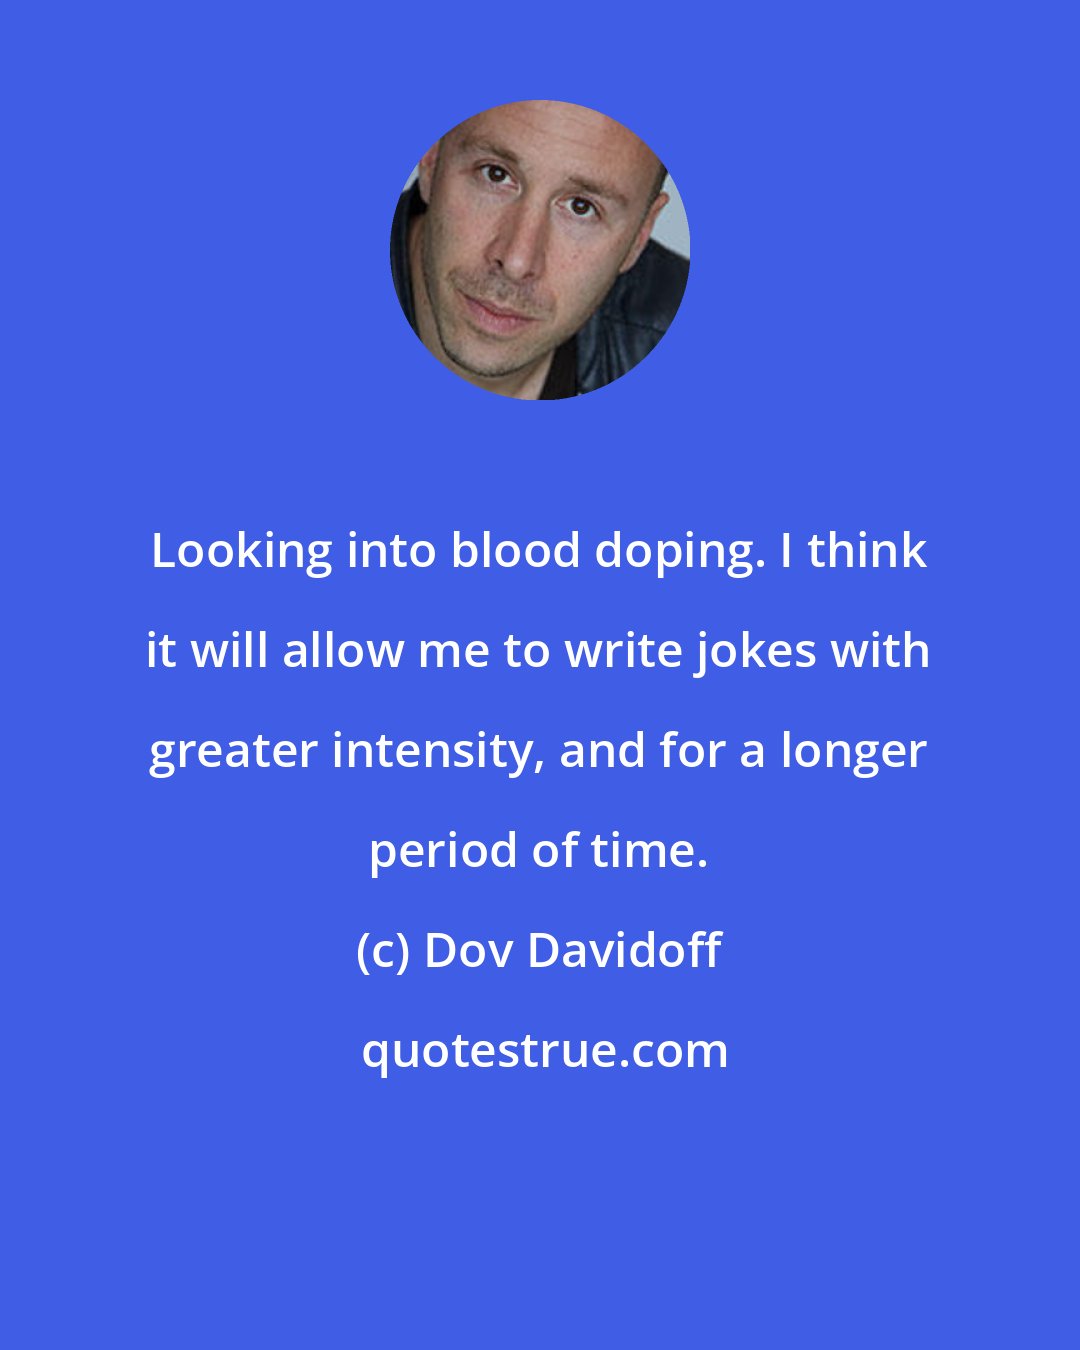 Dov Davidoff: Looking into blood doping. I think it will allow me to write jokes with greater intensity, and for a longer period of time.